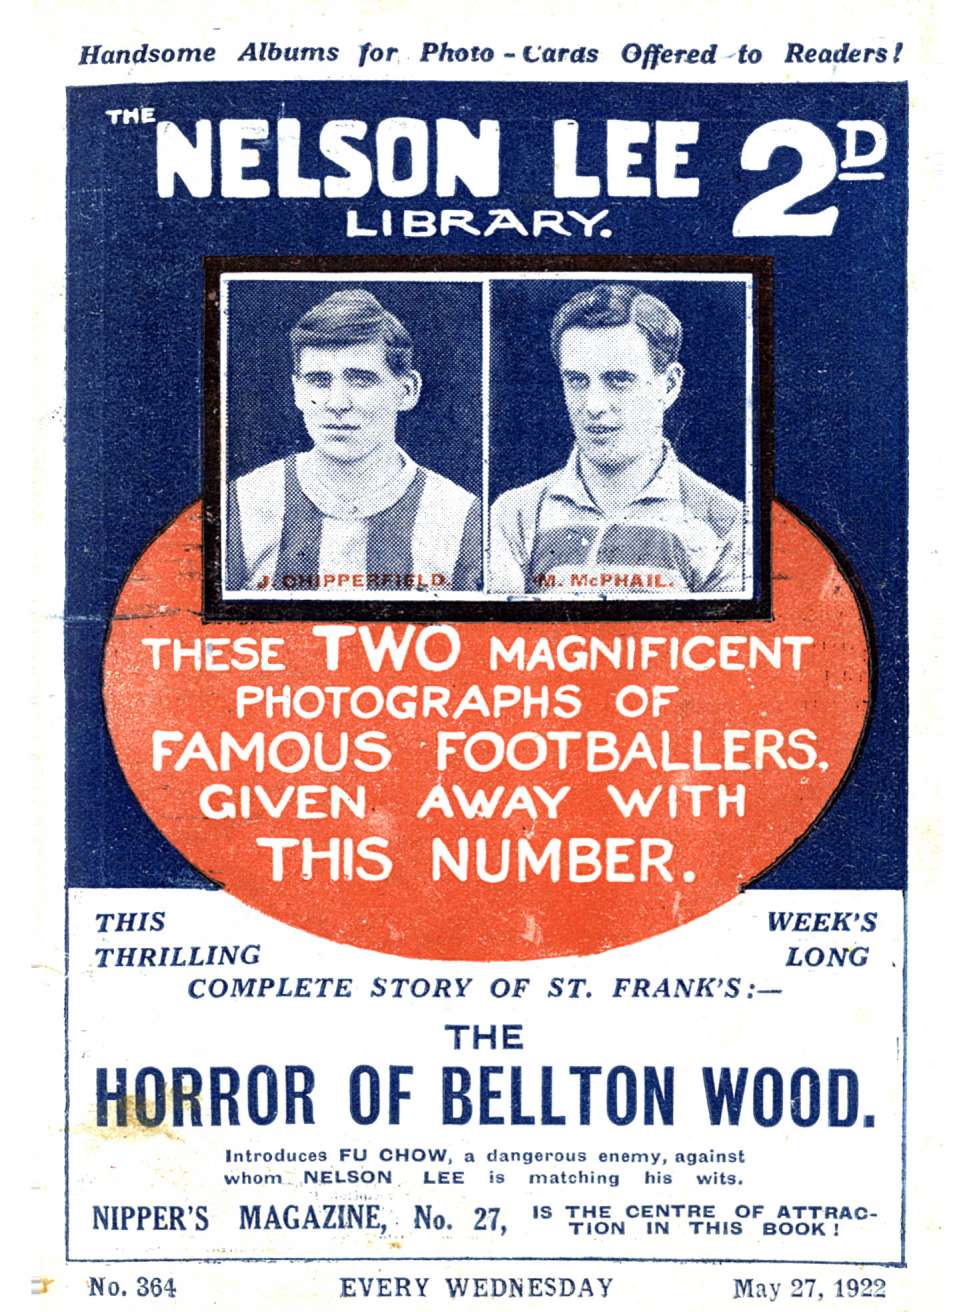 Comic Book Cover For Nelson Lee Library s1 364 - The Horror of Bellton Wood